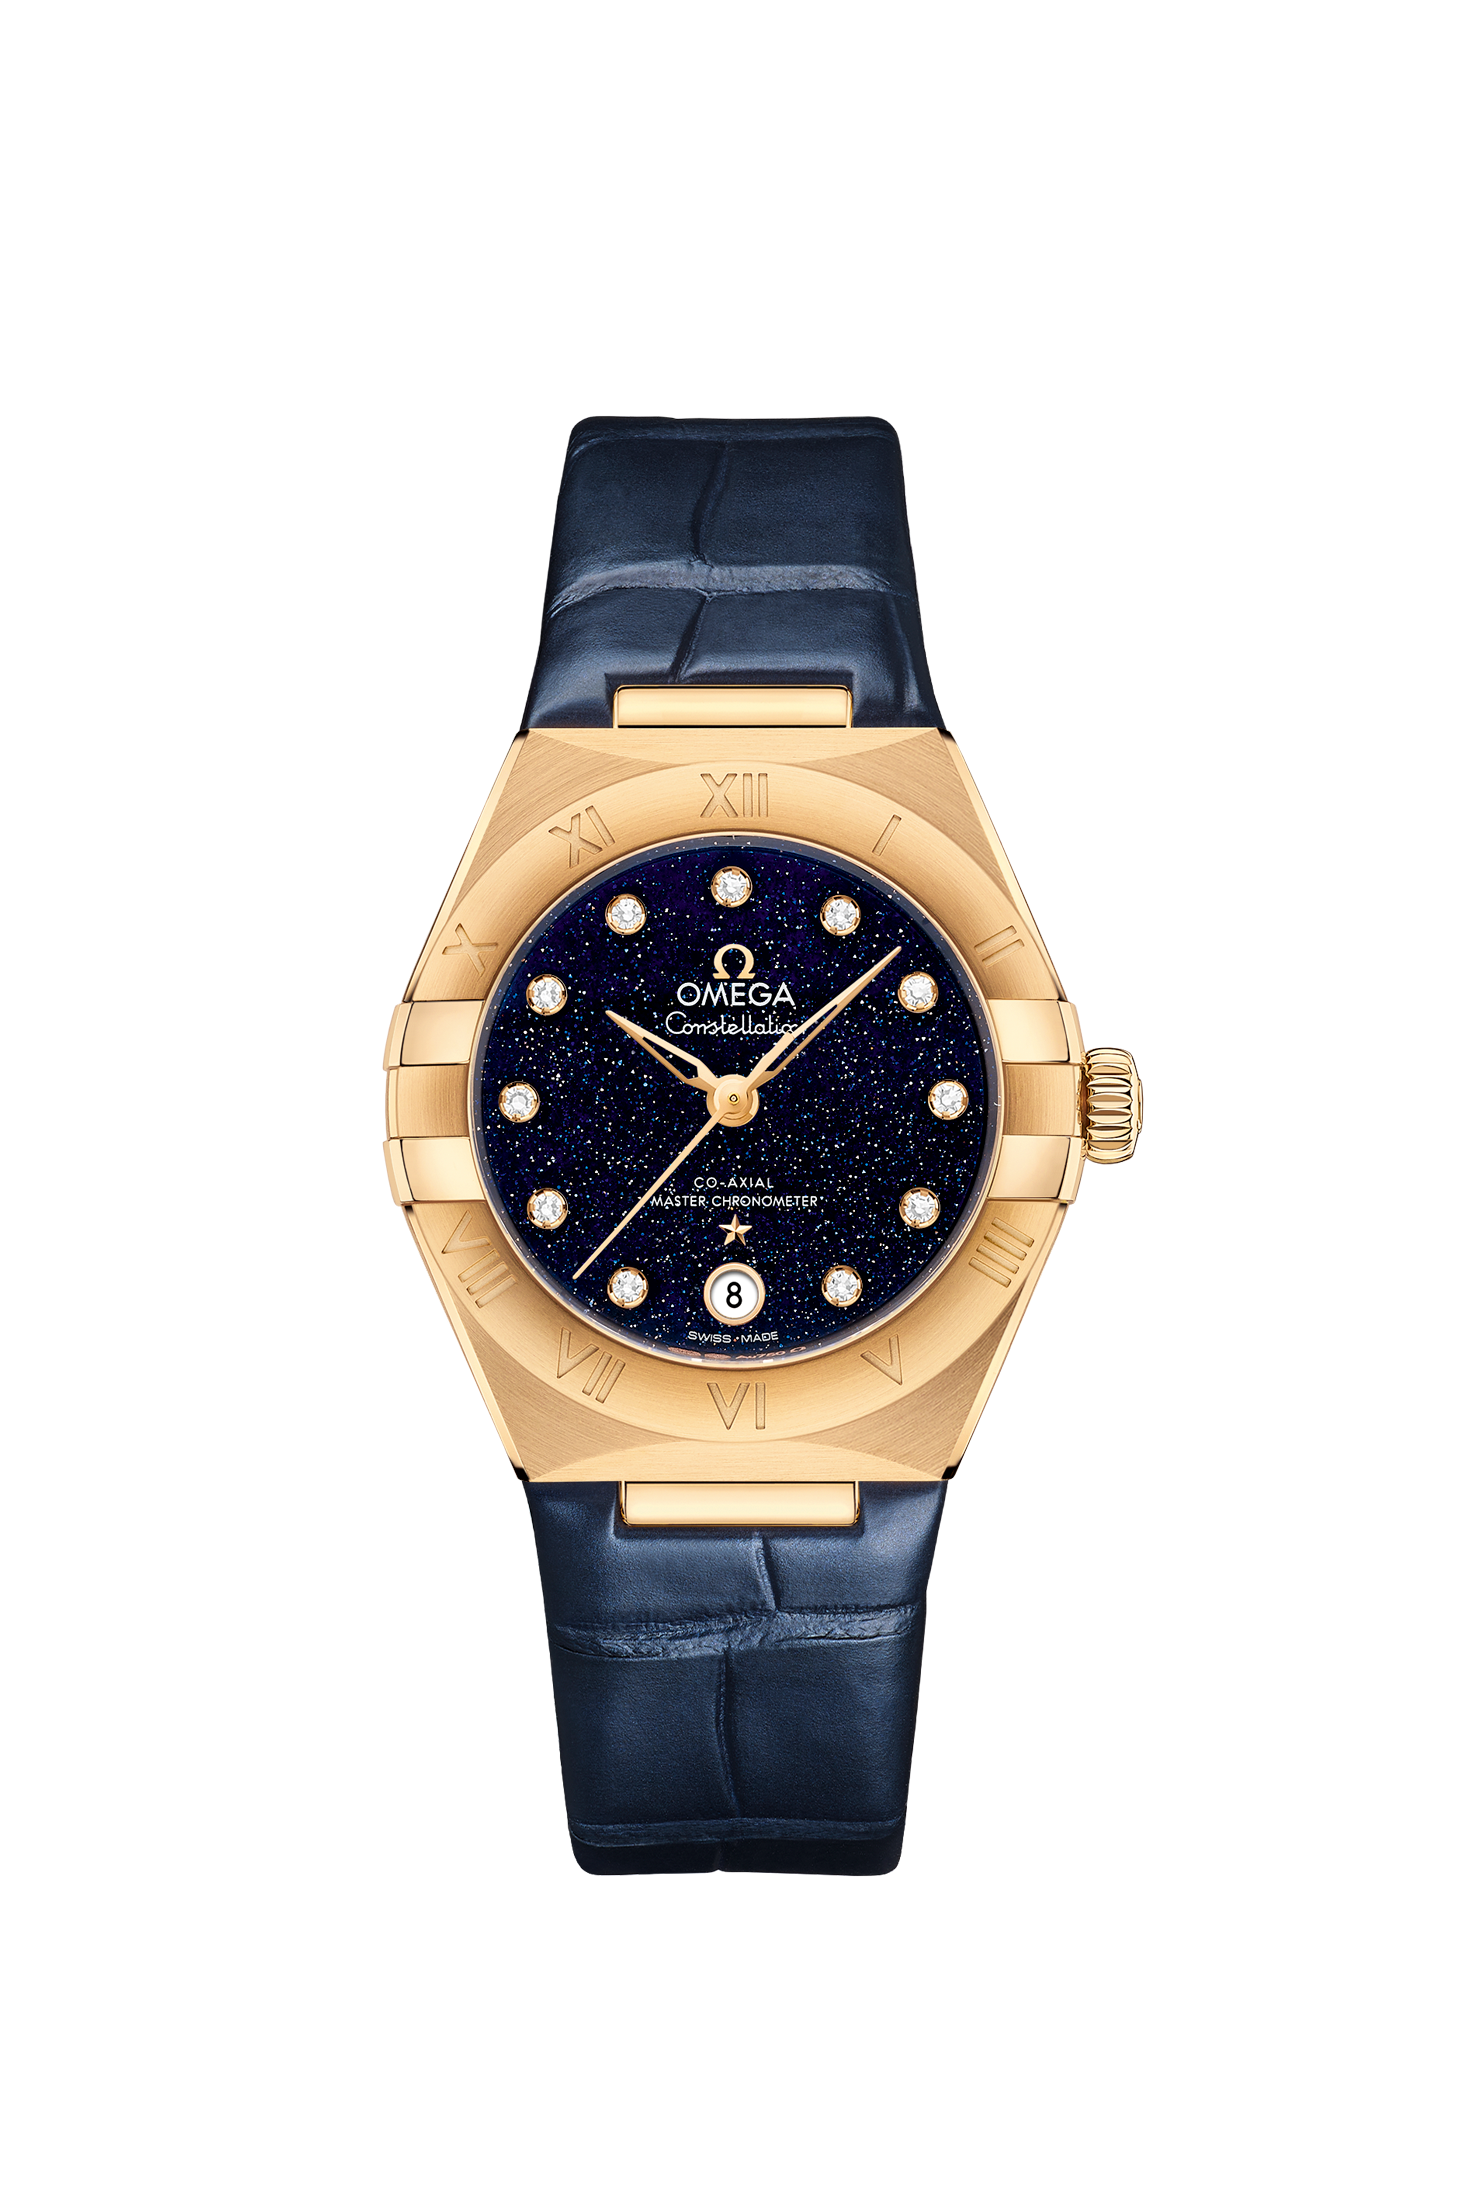 Ladies' watch  OMEGA, Constellation Co Axial Master Chronometer / 29mm, SKU: 131.53.29.20.53.001 | watchapproach.com